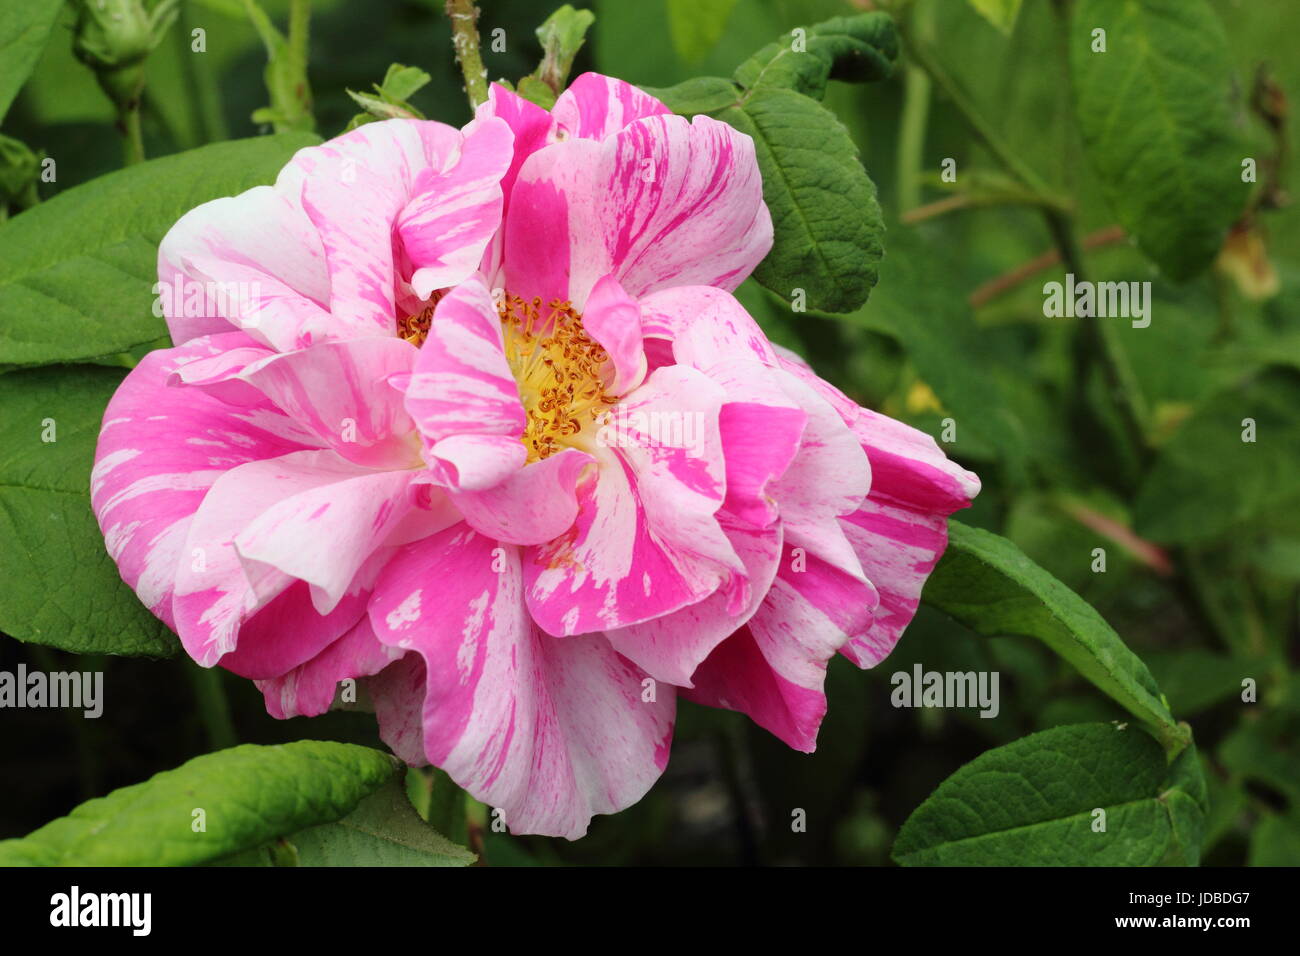 Rosa gallica 'versicolor', also called 'Rosa Mundi' and 'French Rose. an old, scented shrub rose with striking striped petals, flowering in June, UK Stock Photo